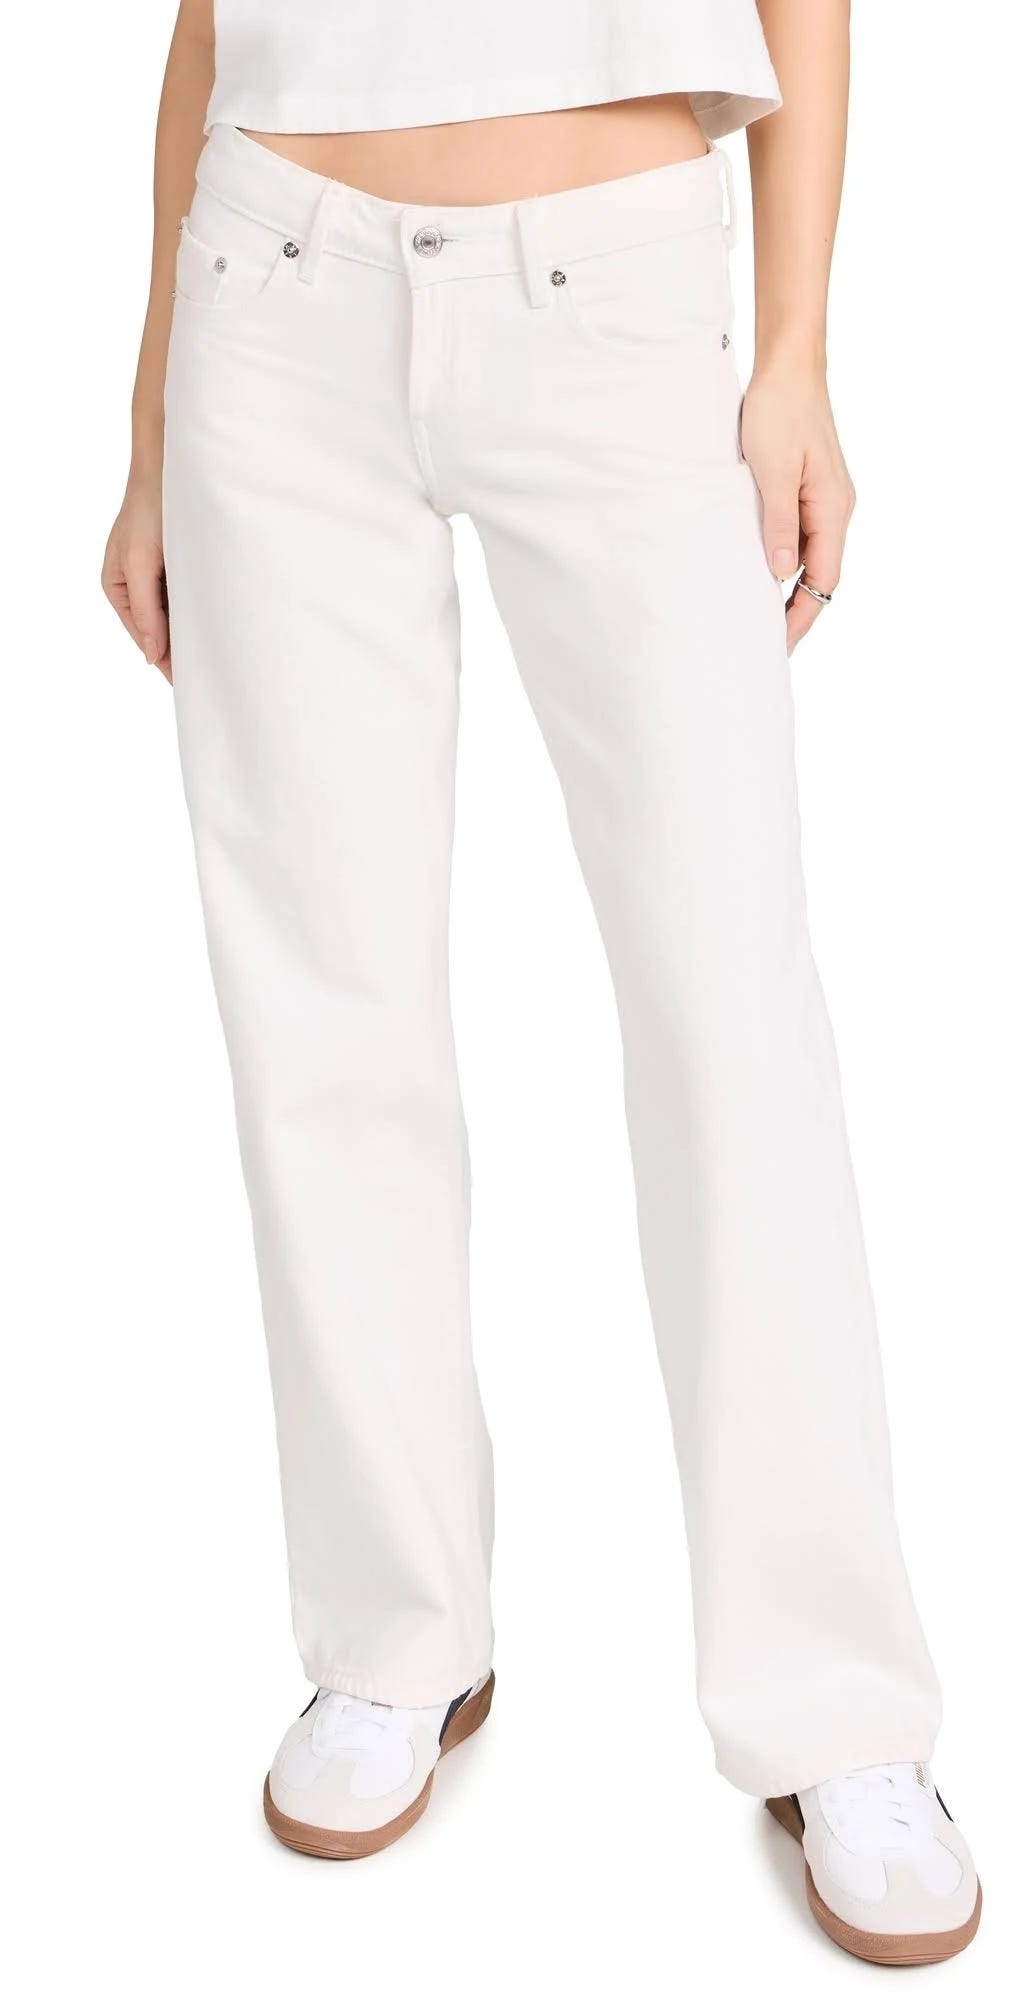 Vintage-Inspired Levi's White Jeans - Low-Rise, Loose Fit | Image